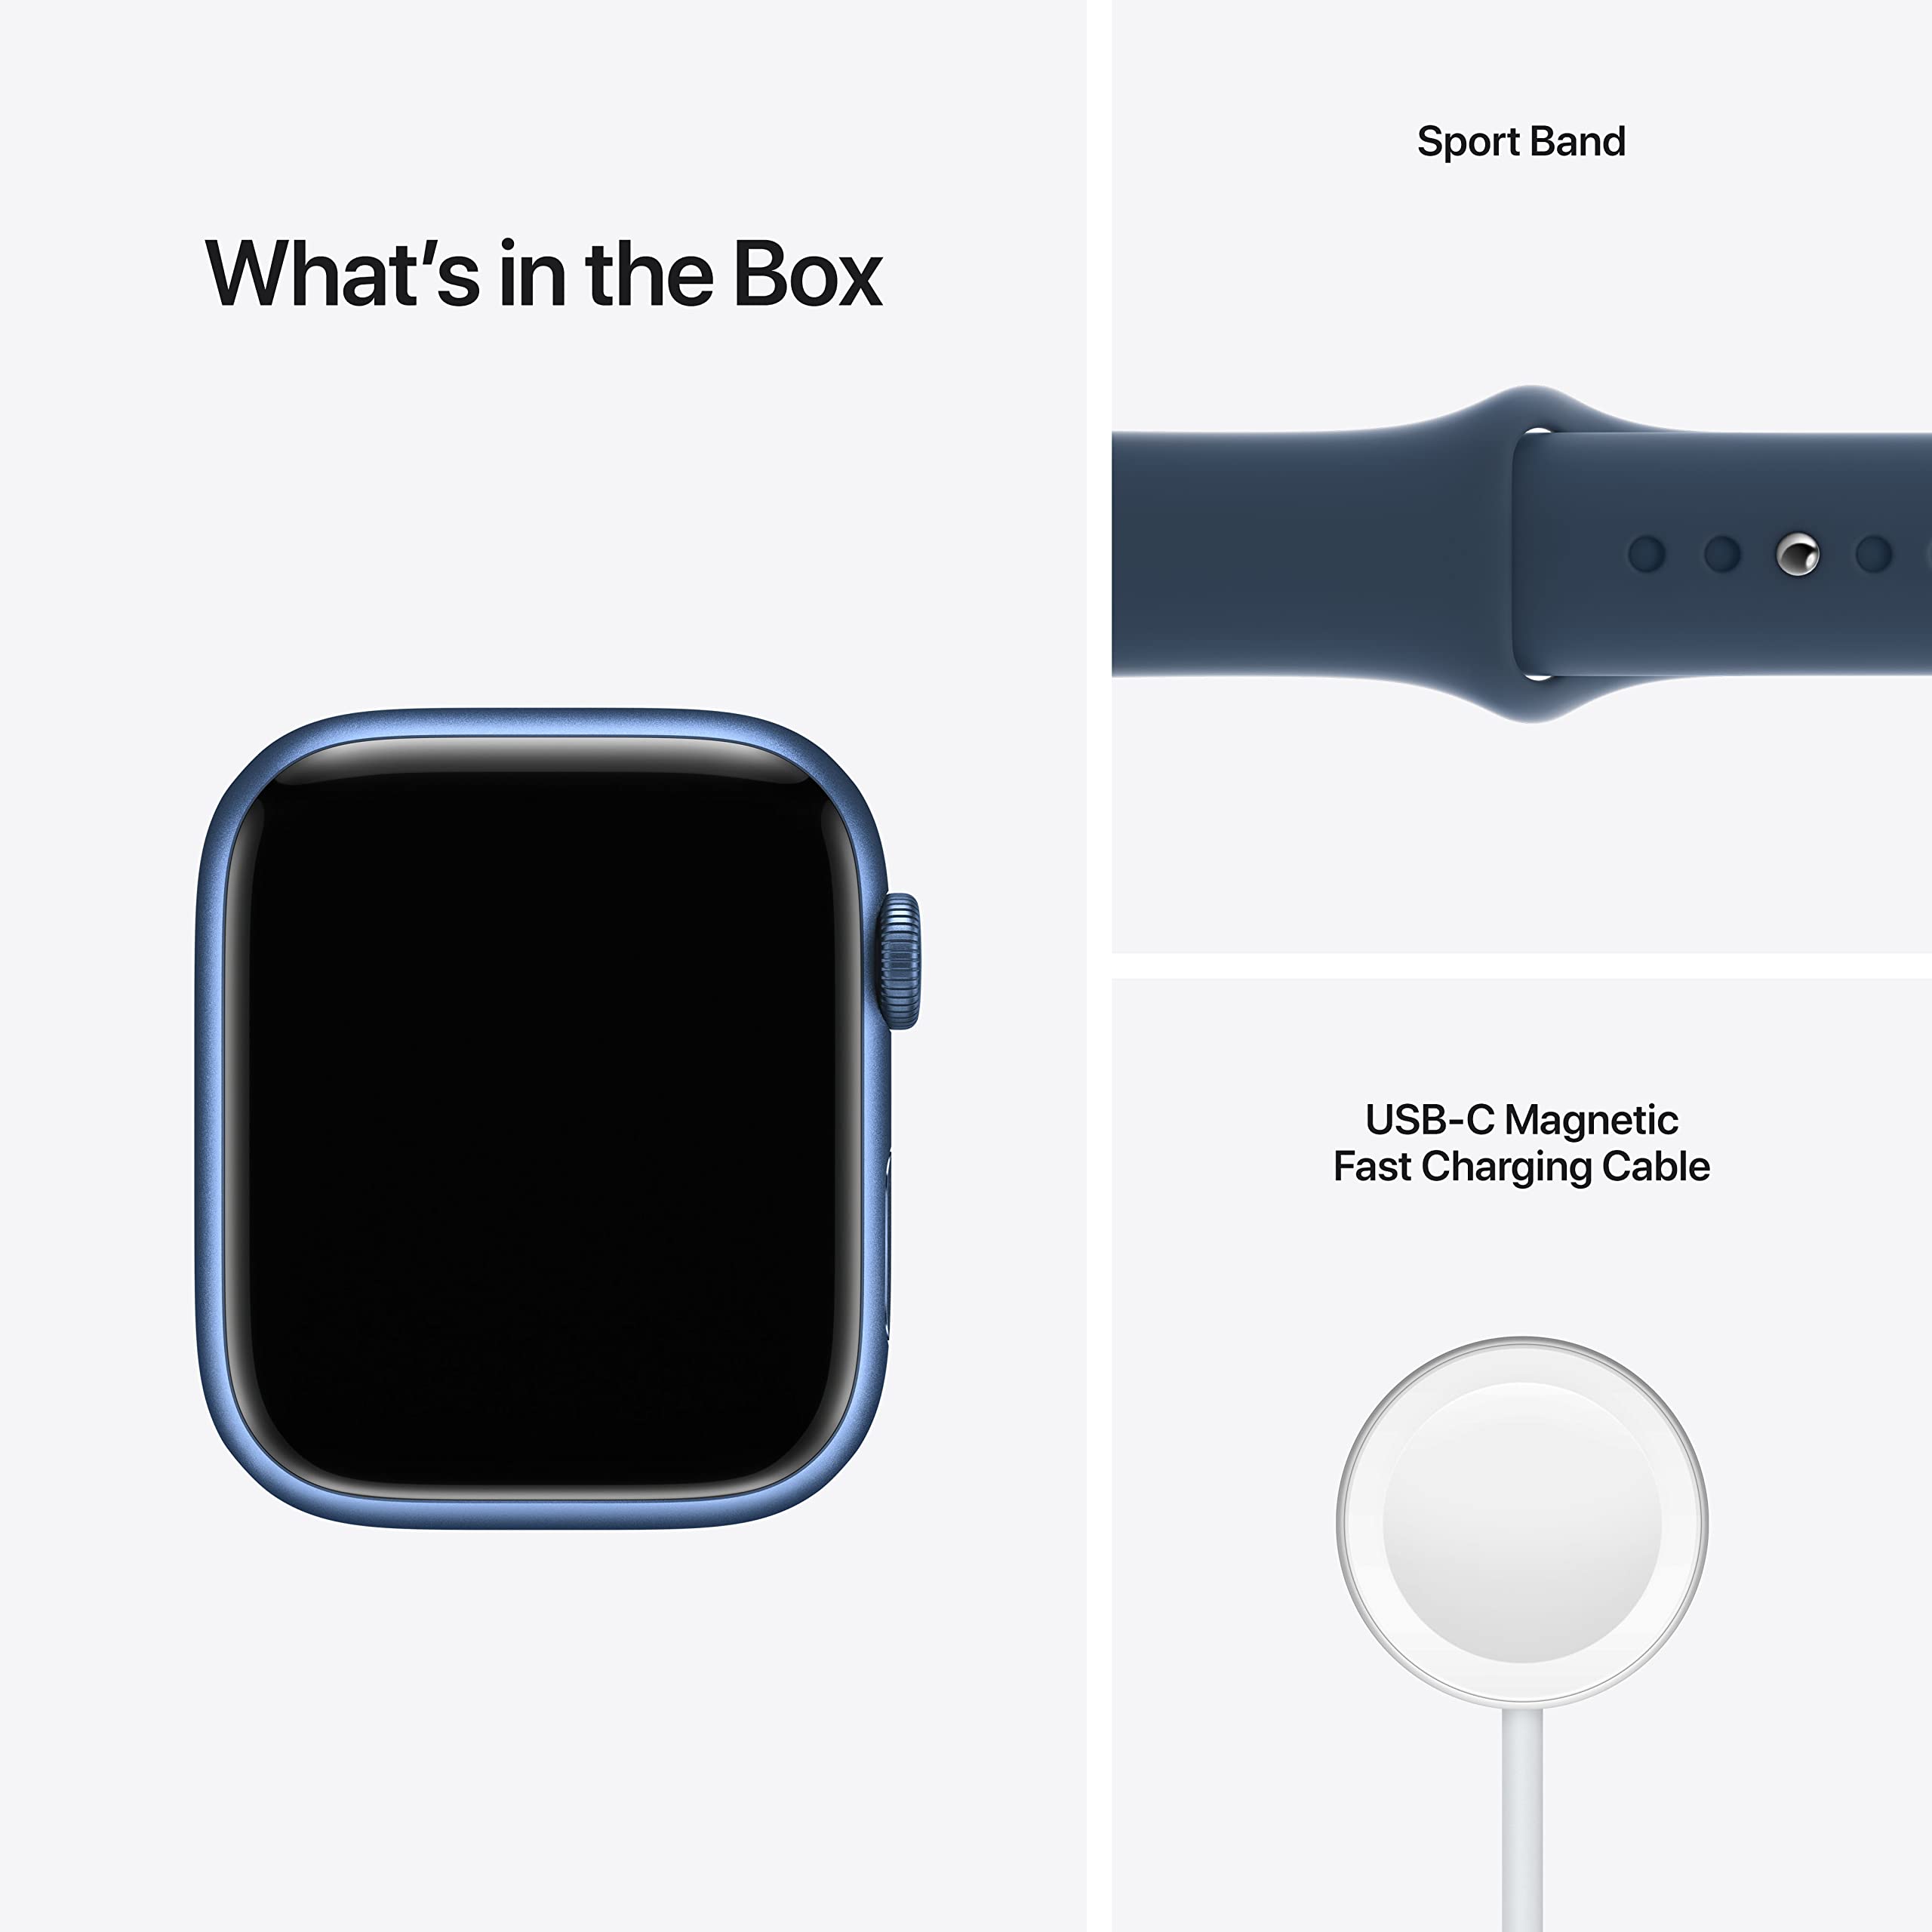 Apple Watch Series 7 [GPS + Cellular 45mm] Smart Watch w/Blue Aluminum Case with Abyss Blue Sport Band. Fitness Tracker, Blood Oxygen & ECG Apps, Always-On Retina Display, Water Resistant AppleCare